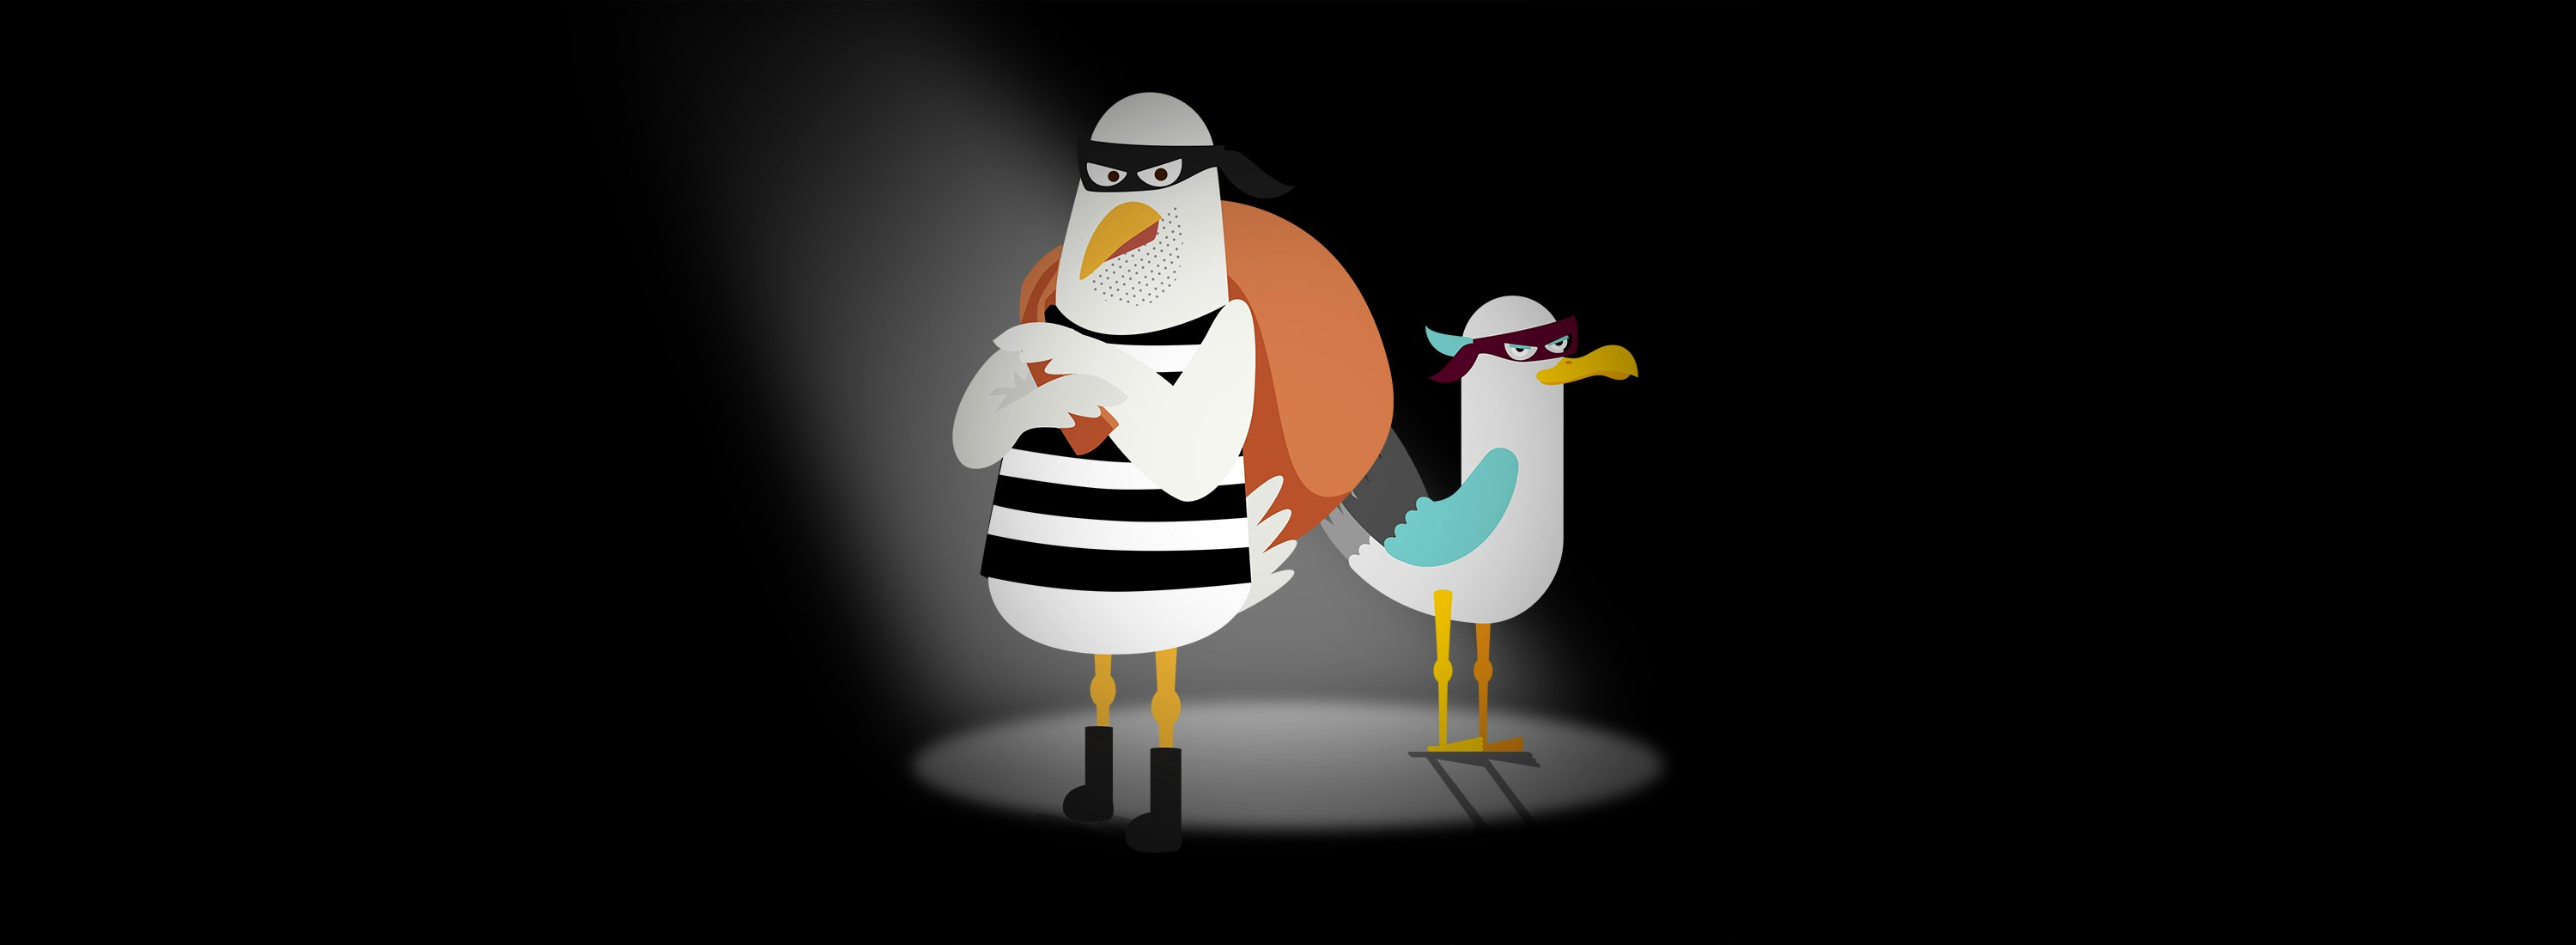 An illustration of two seagulls one tall with it's wings crossed and one smaller standing normally both are wearing a Zorro style mask underneath a spotlight on a black background